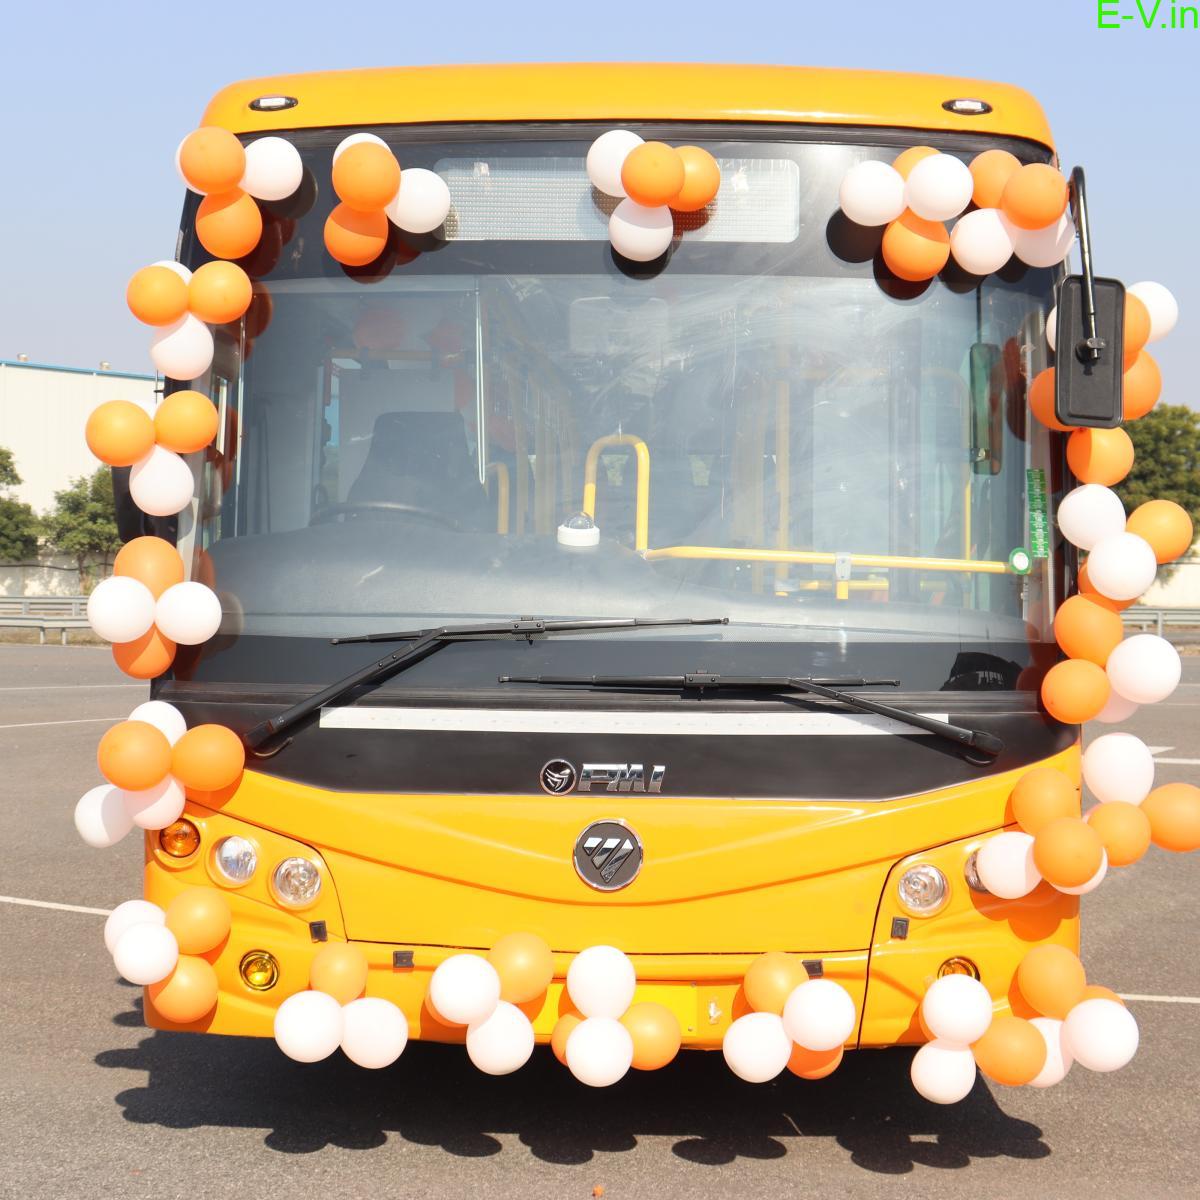 PMI Electro delivered the 1000th electric bus: Another feather in the crown